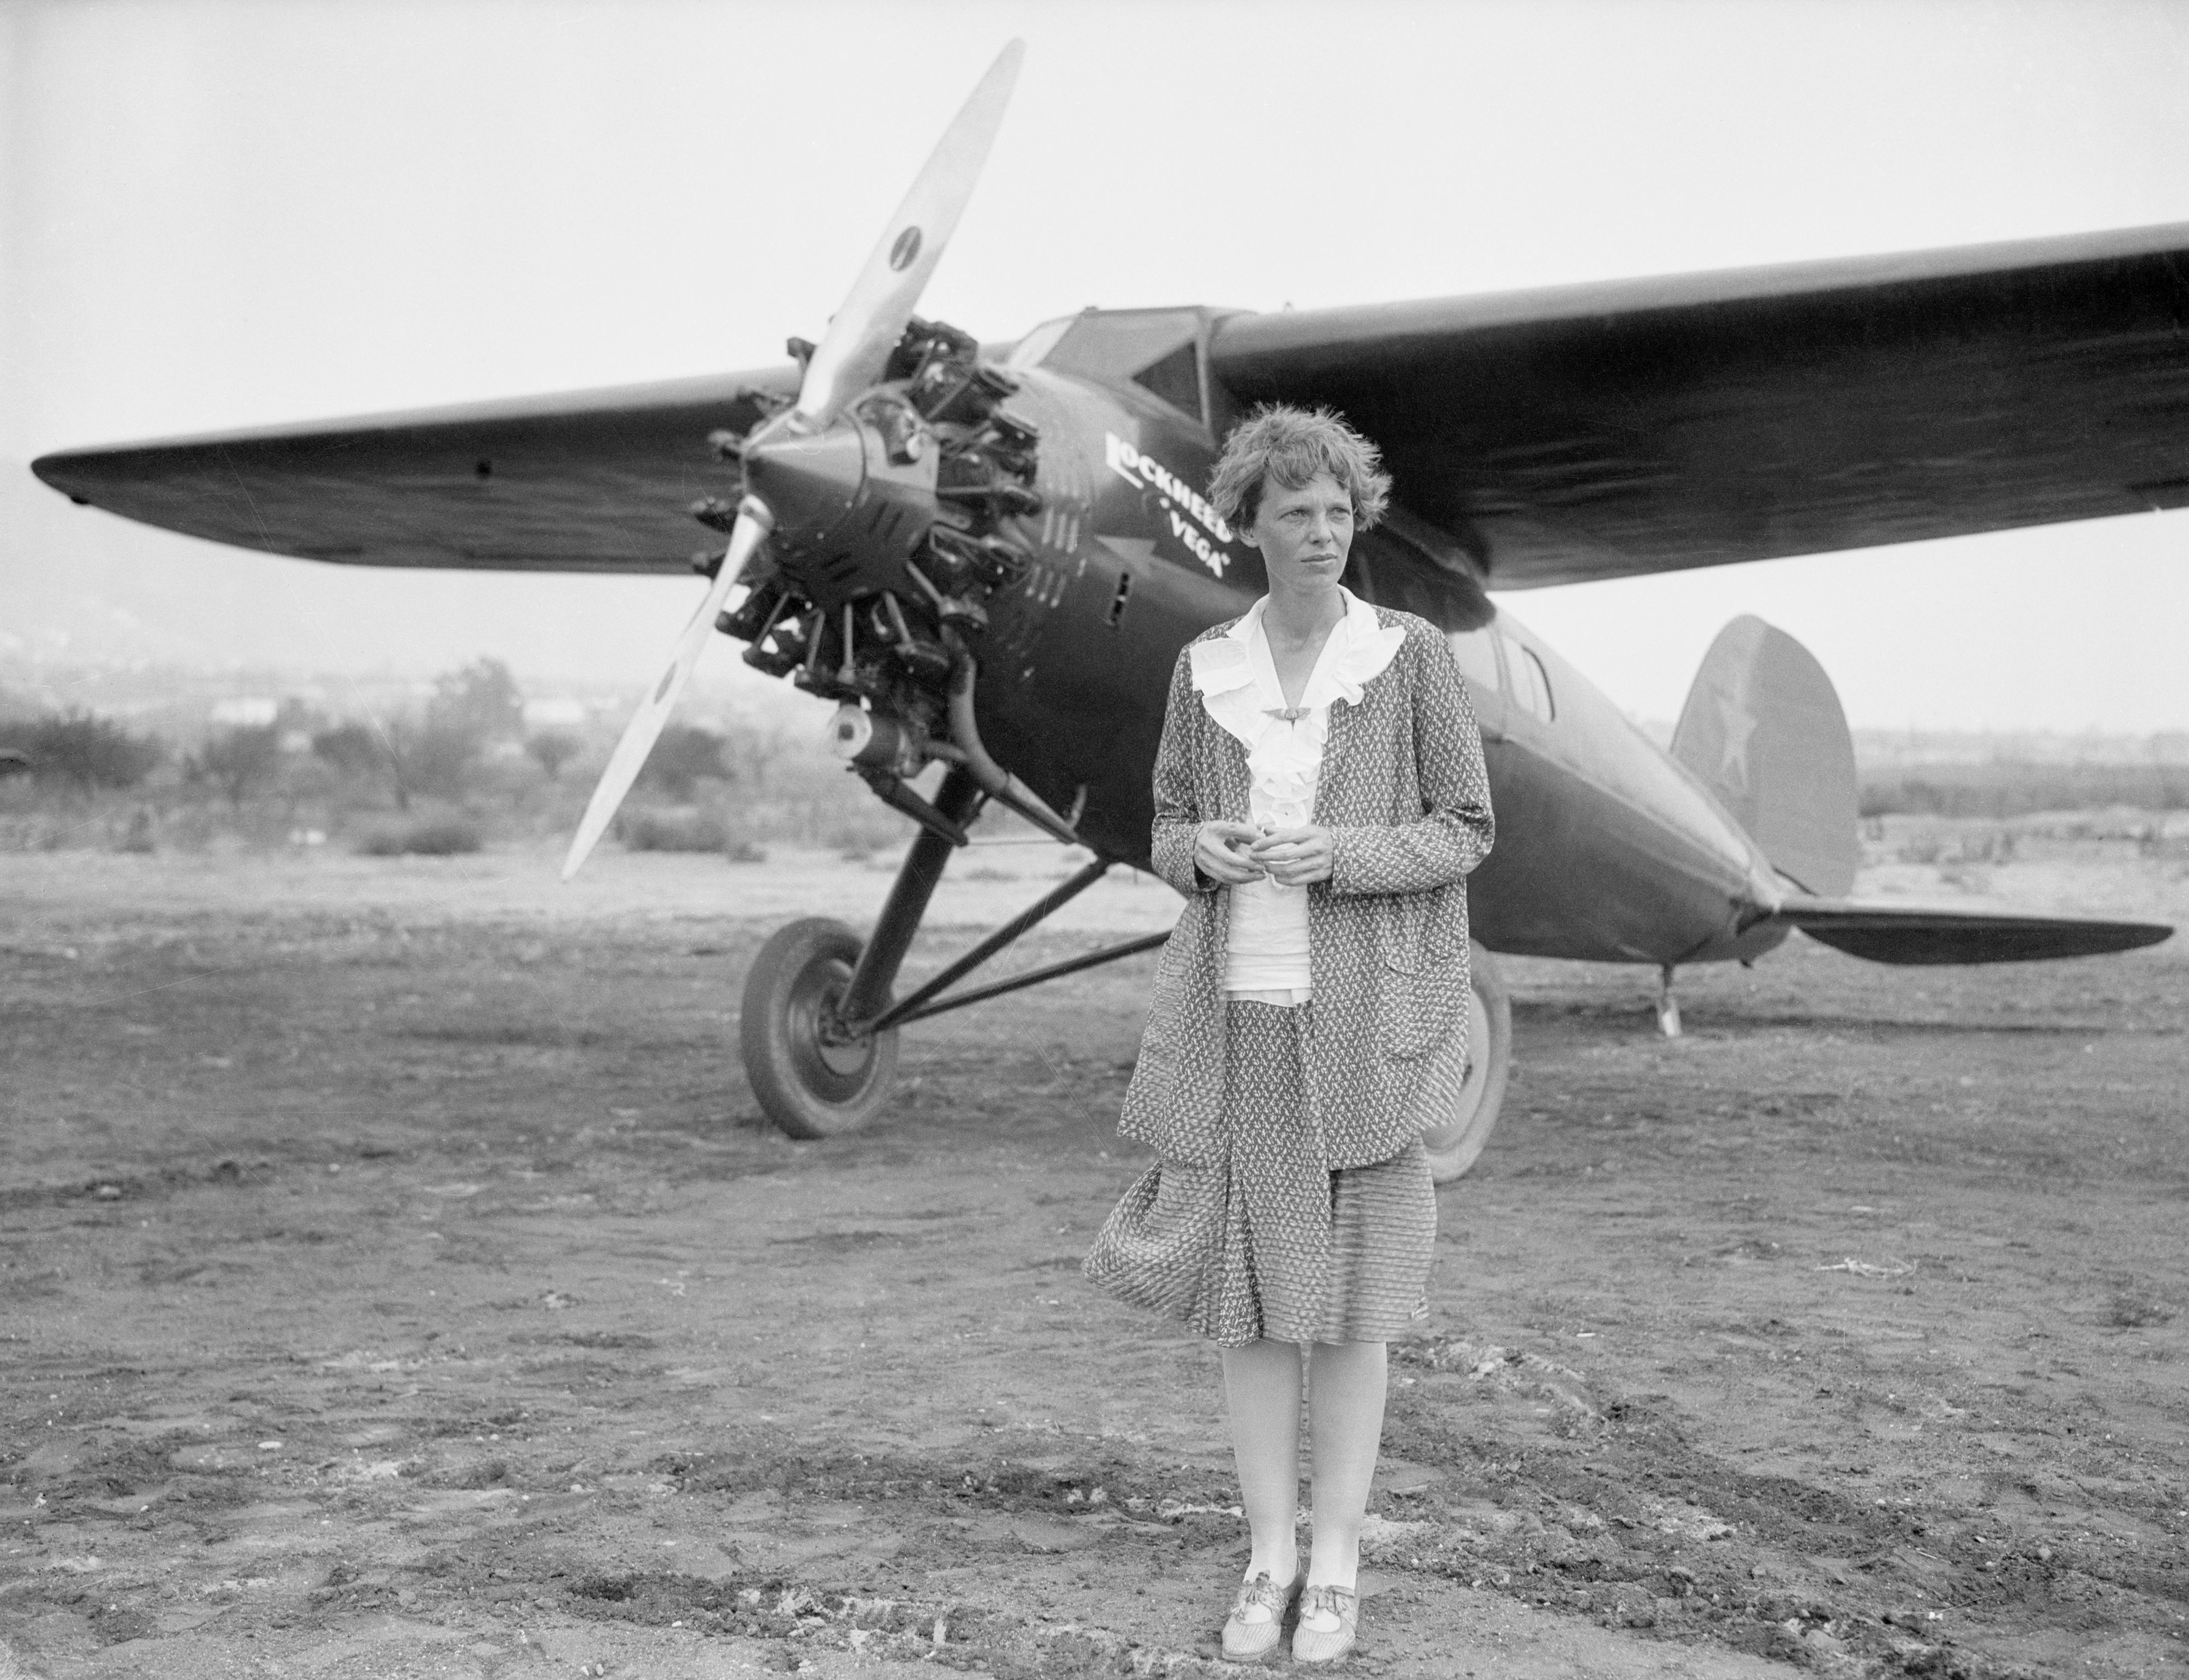 Amelia Earhart at Long Beach, Ca, with her plane.